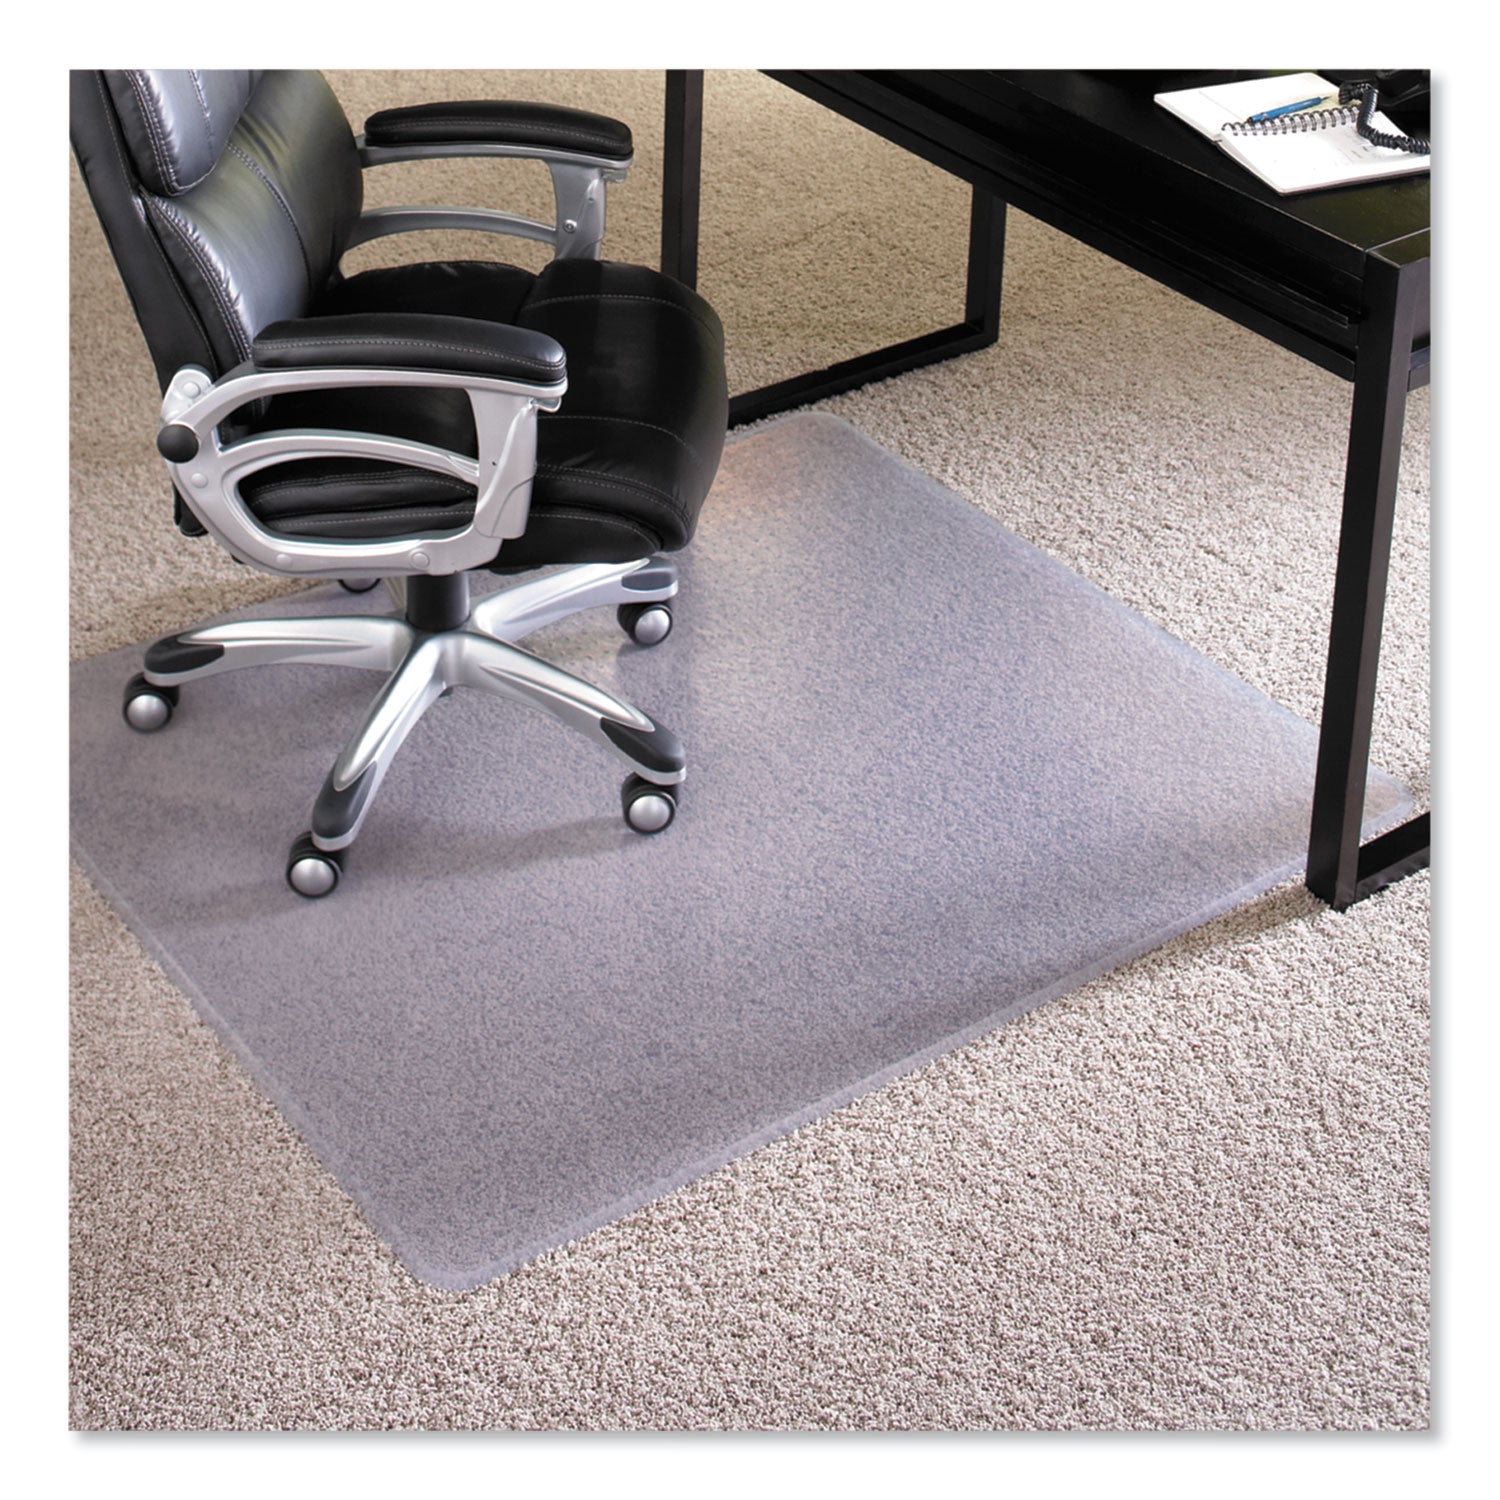 EverLife Intensive Use Chair Mat for High Pile Carpet, Rectangular, 46 x 60, Clear - 